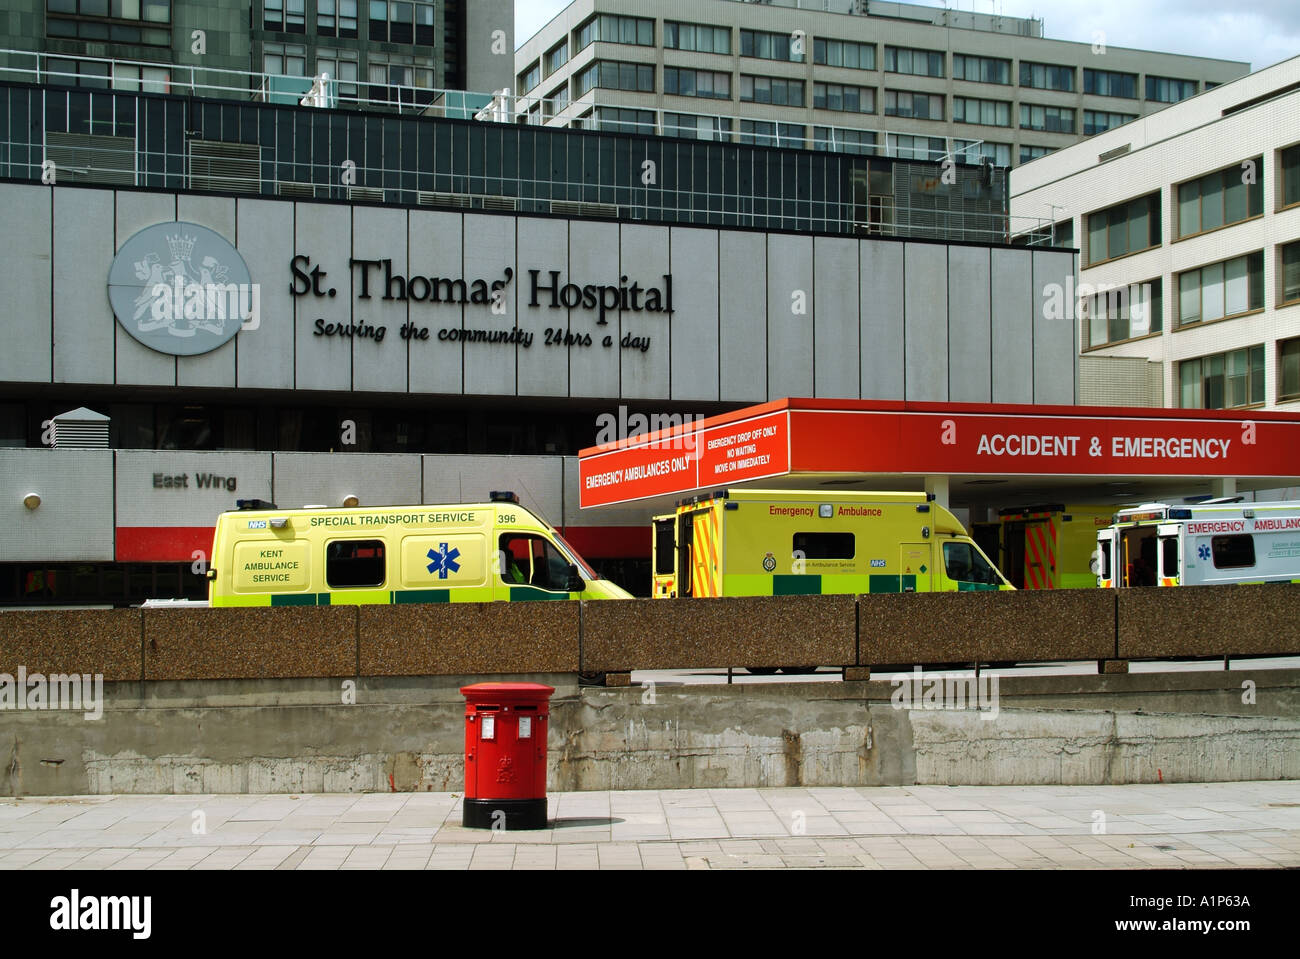 London Lambeth St Thomas hospital accident and emergency admissions unit and ambulance delivery parking area Stock Photo